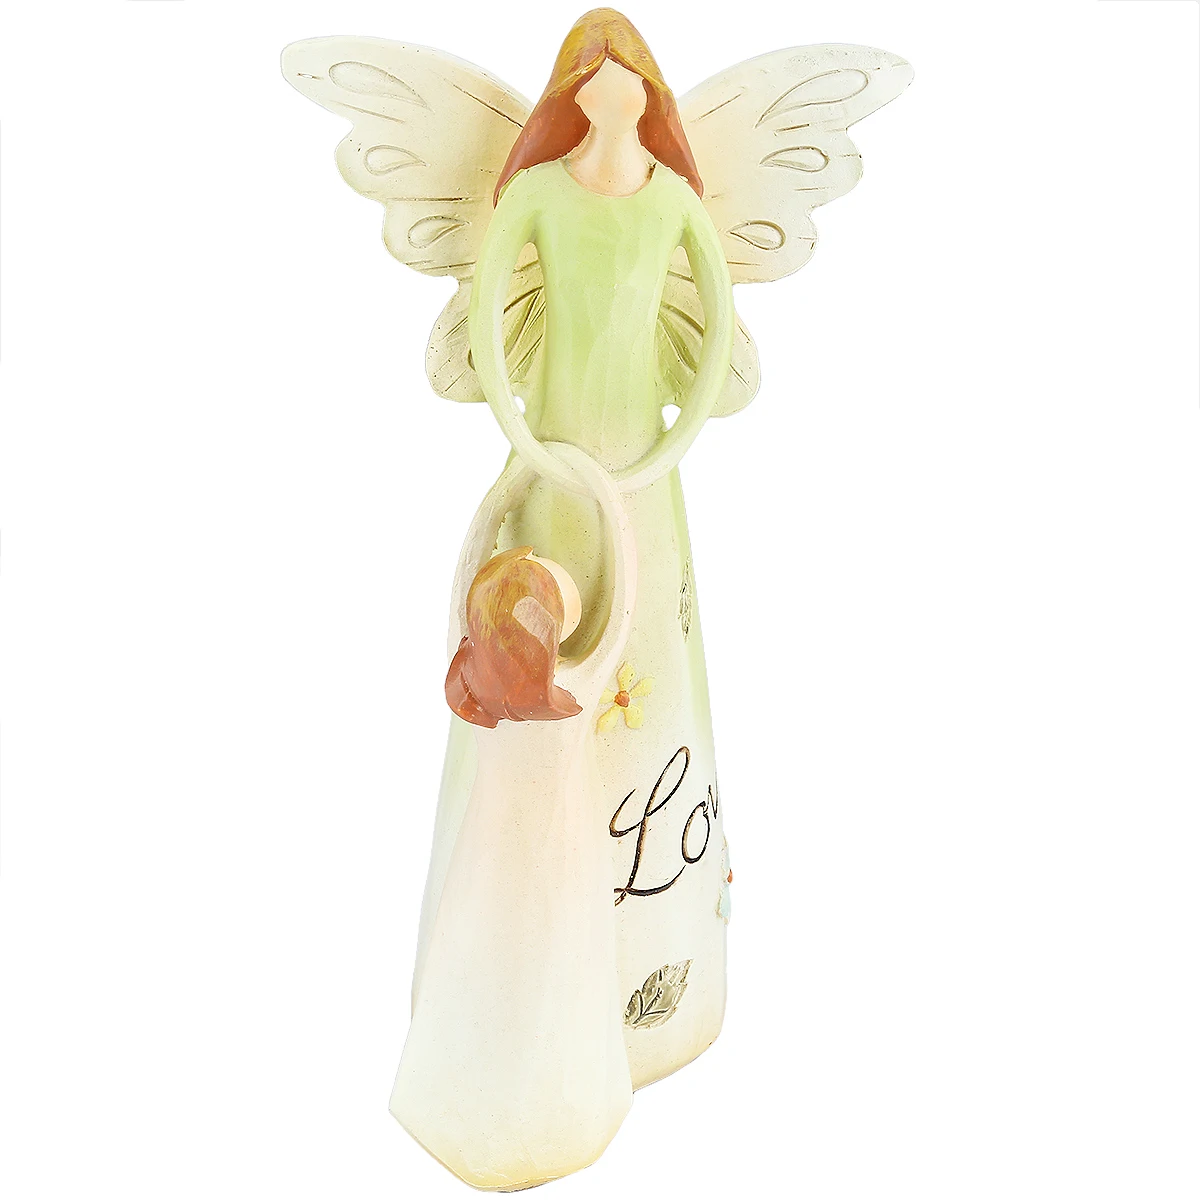 Guardian Angel Family Sculpture Resin Figurine Healing Hand Carved Statue For Church Religious Ornaments Garden Home Decoration family watch leather roll bag glass jewelry bracelet for case storage home officce supplies